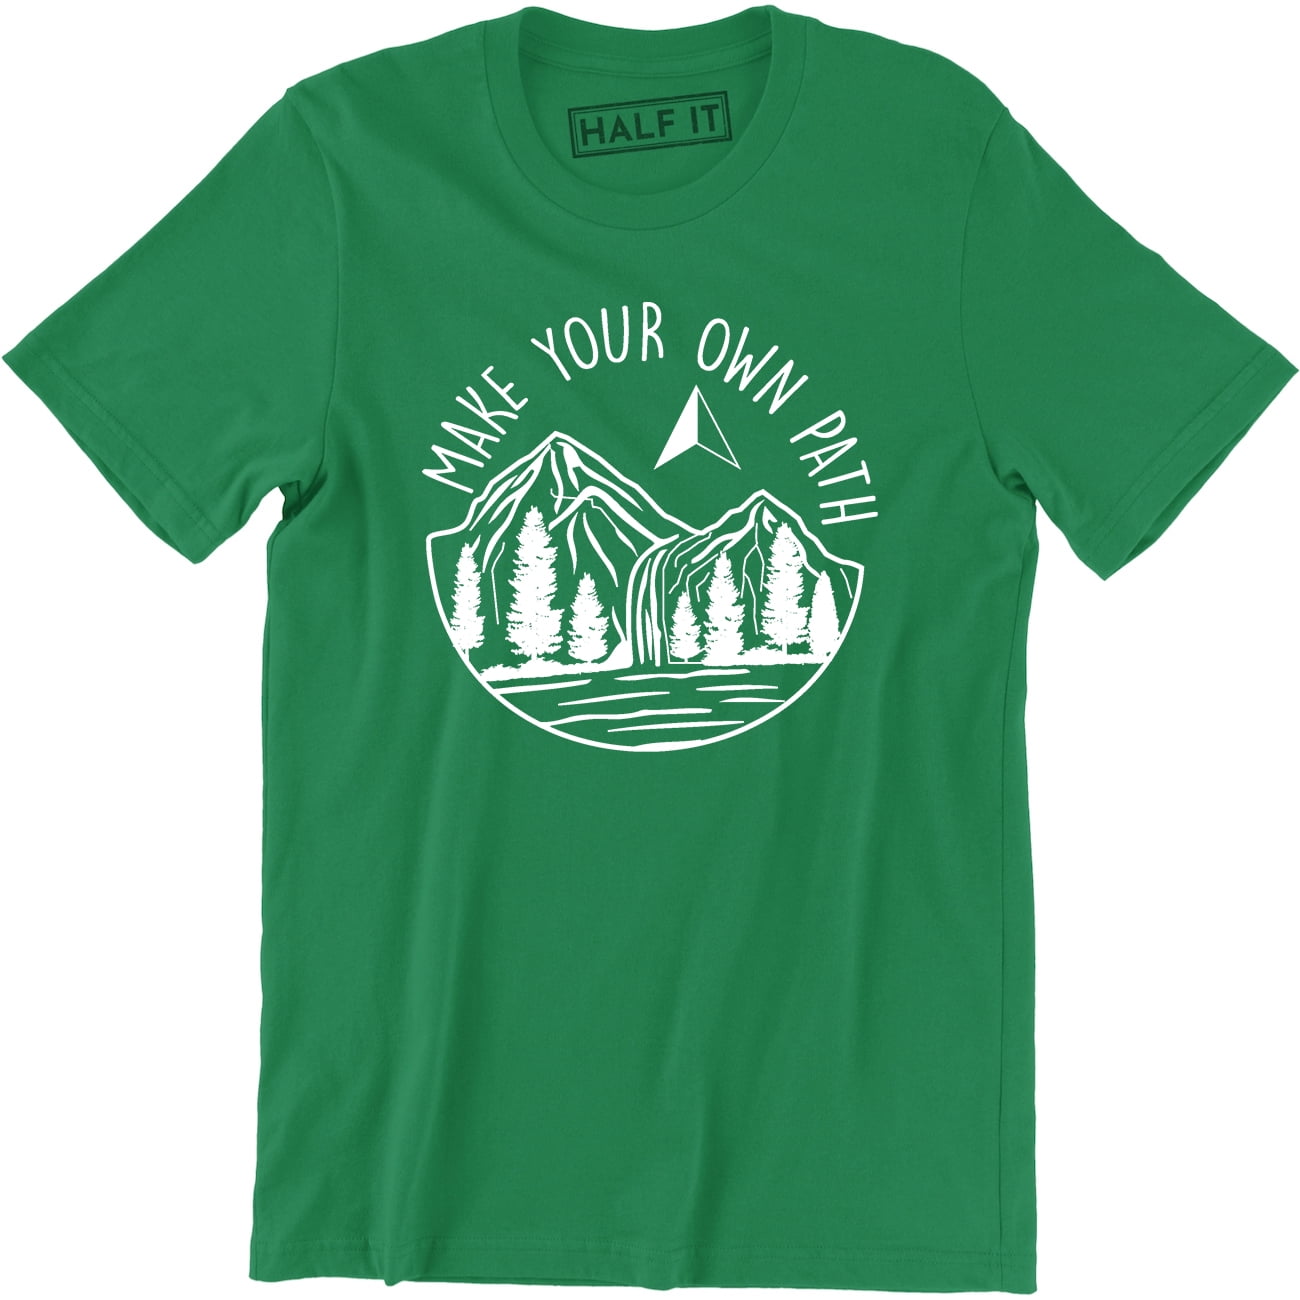 Make Your Own Path Men's Sonoma Goods For Life Outdoors Adventure T-Shirt 